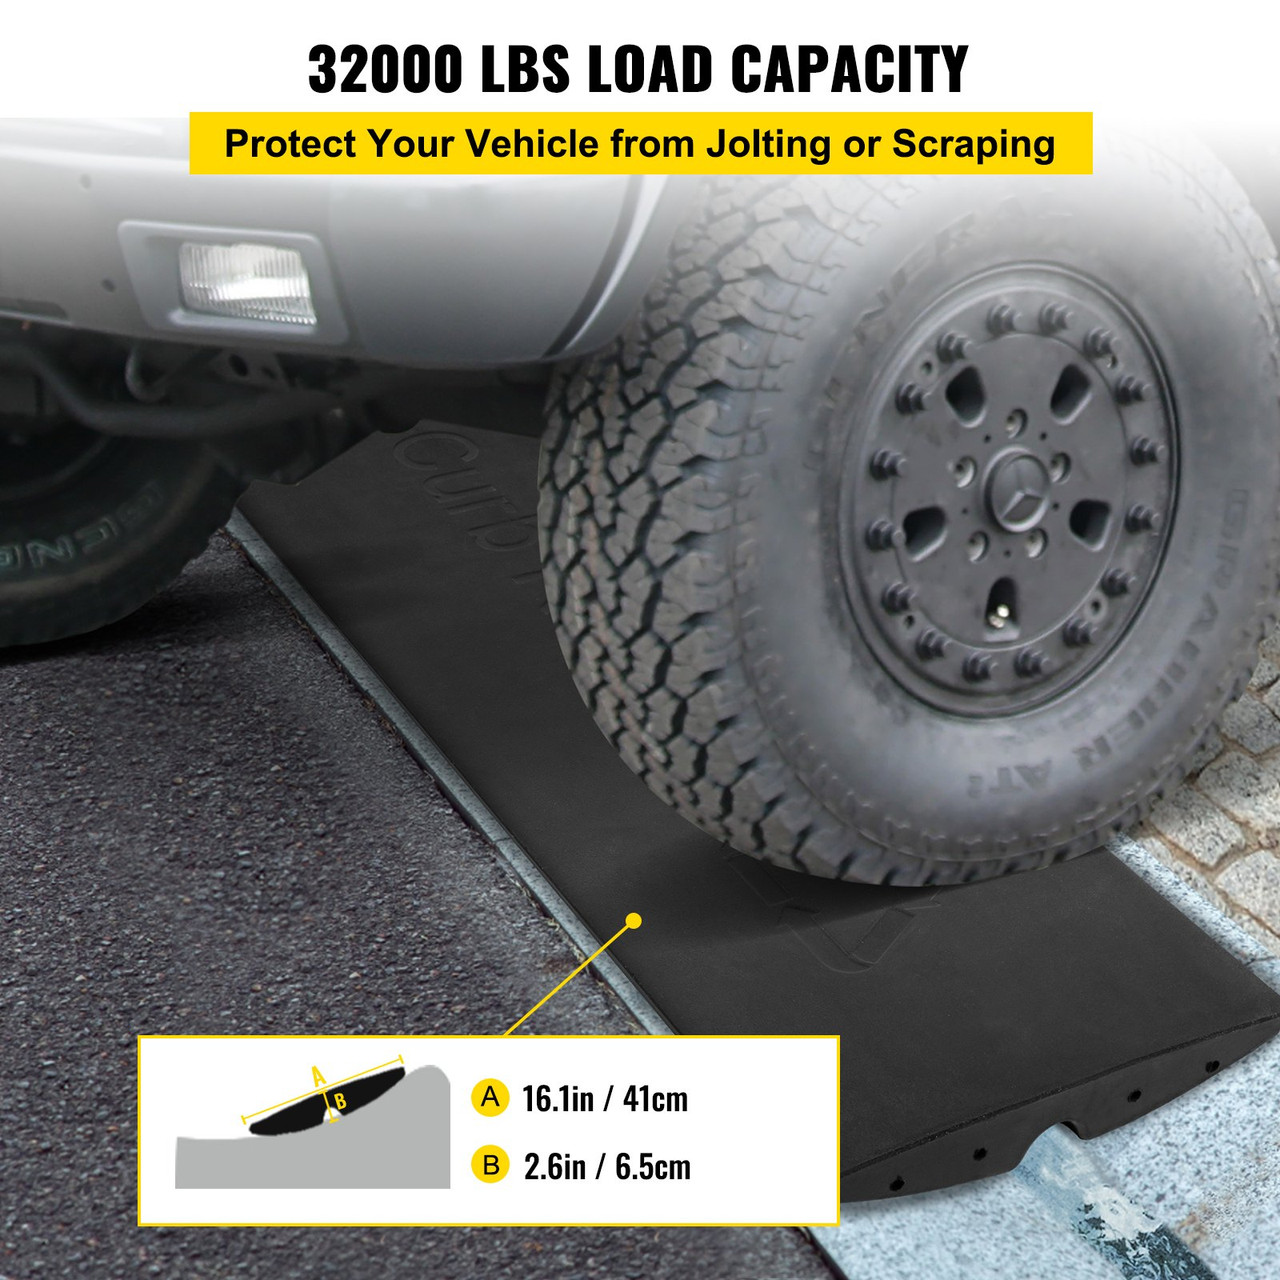 Curb Ramp, 1 Pack Rubber Driveway Ramps, Heavy Duty 32000 lbs Weight Capacity Threshold Ramp, 2.6 inch High Curbside Bridge Ramps for Loading Dock Garage Sidewalk, Expandable Full Ramp Set